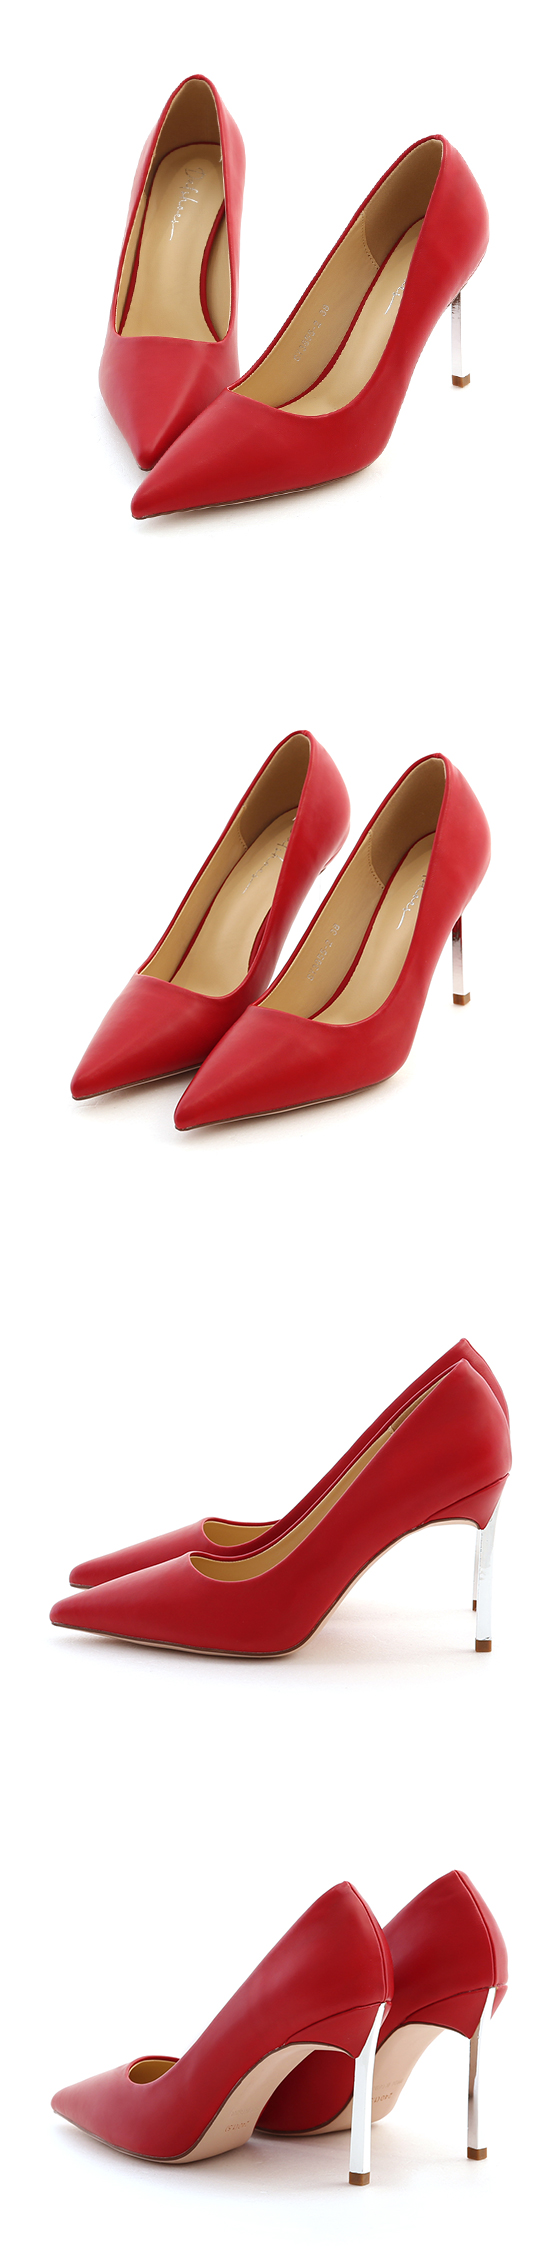 Plain Pointed Toe 9cm High-Heels Red